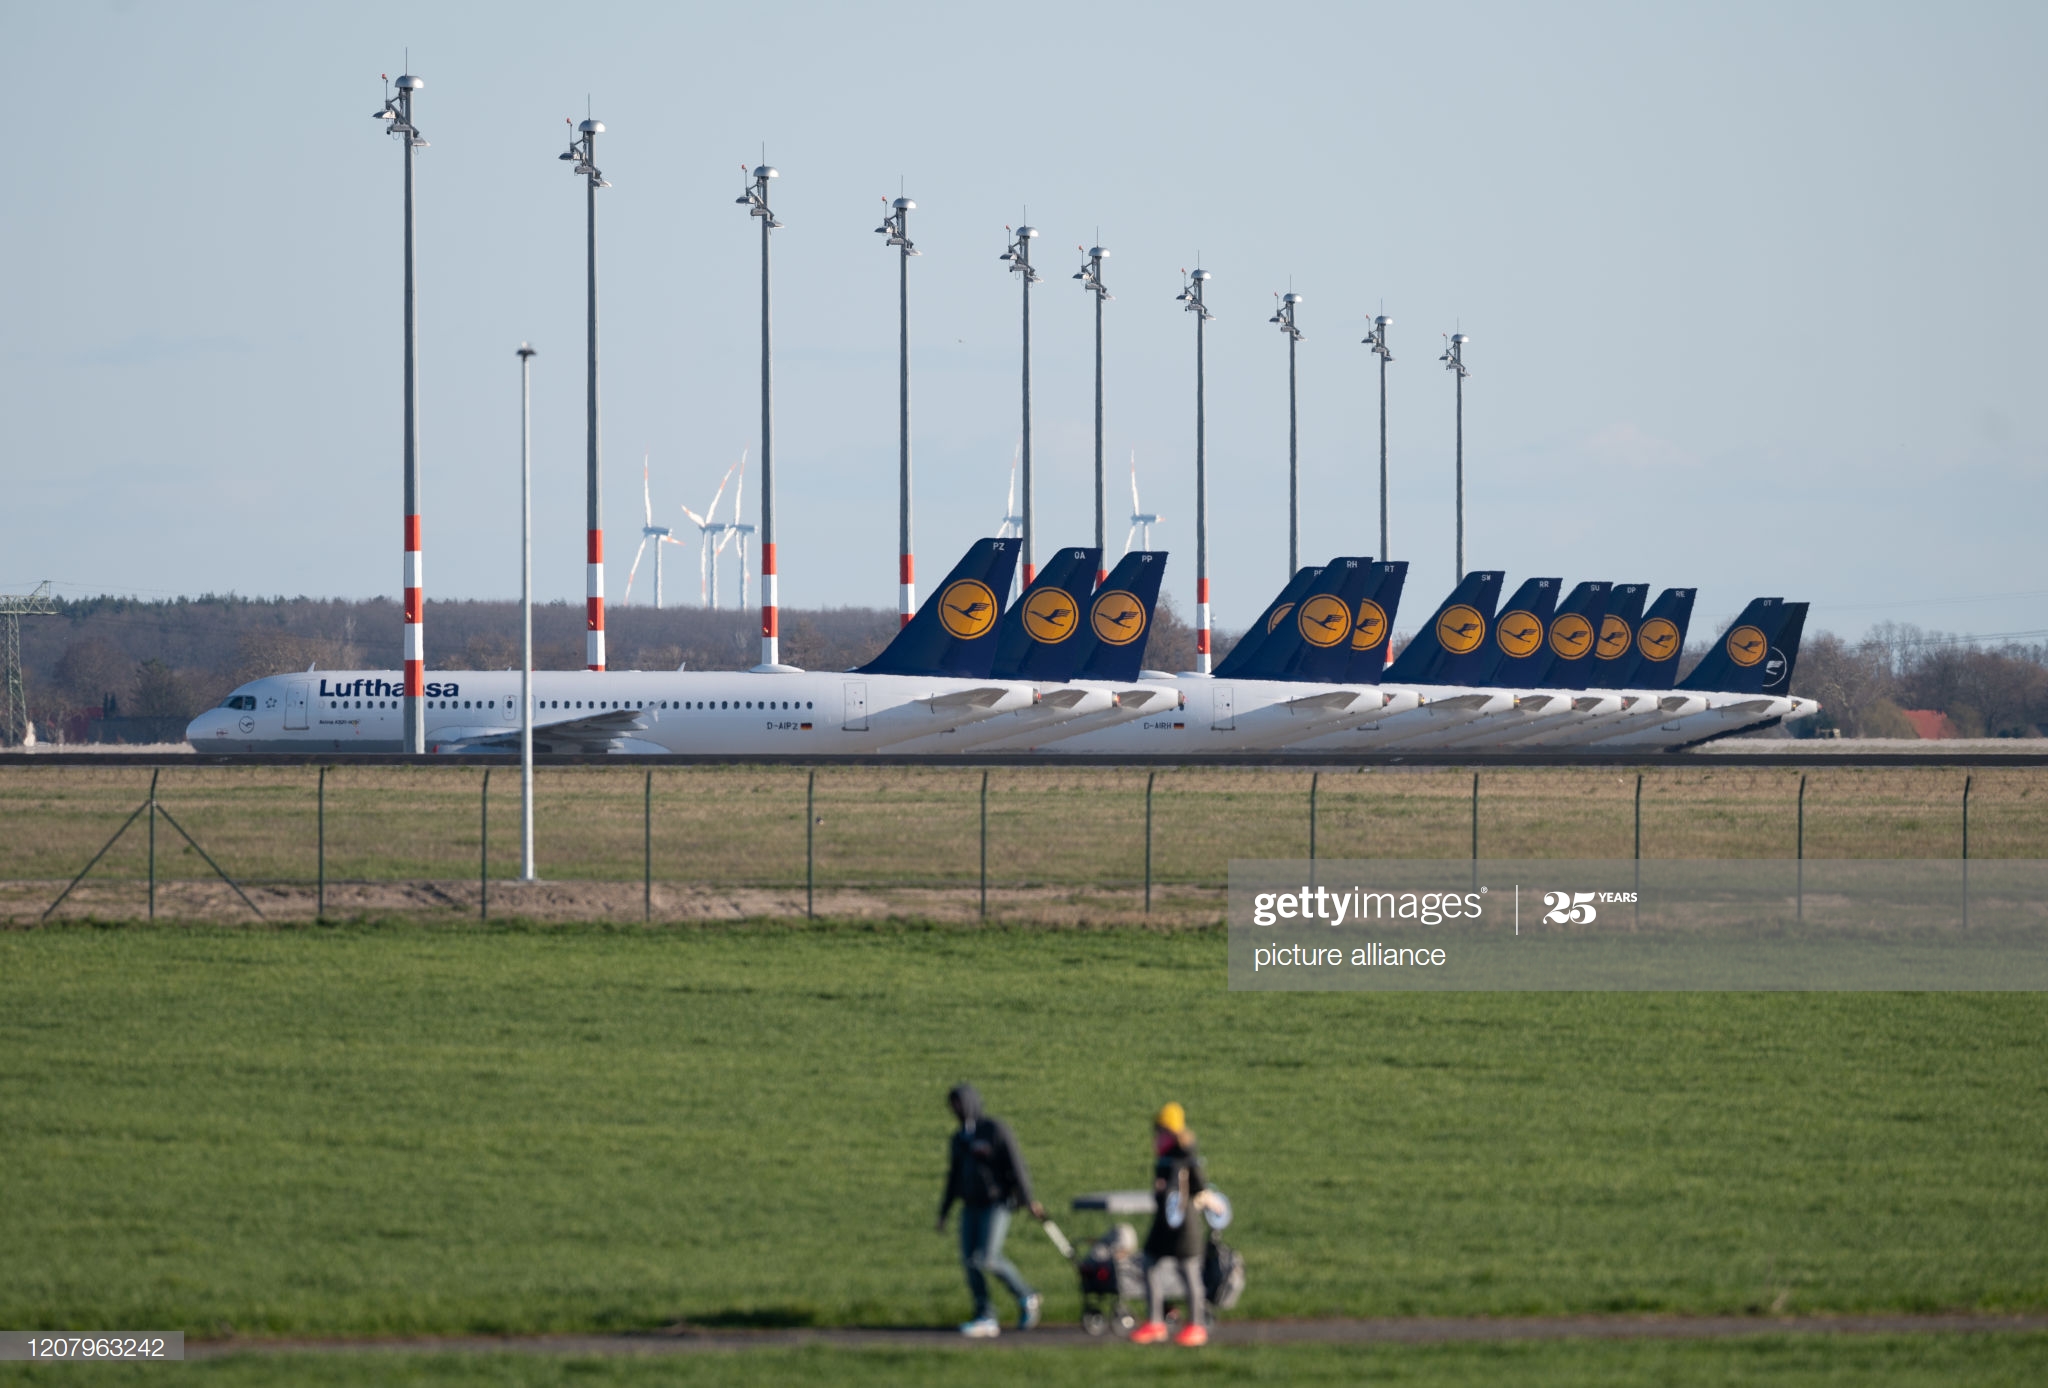 march-2020-berlin-lufthansa-aircraft-are-parked-on-the-apron-of-picture-id1207963242